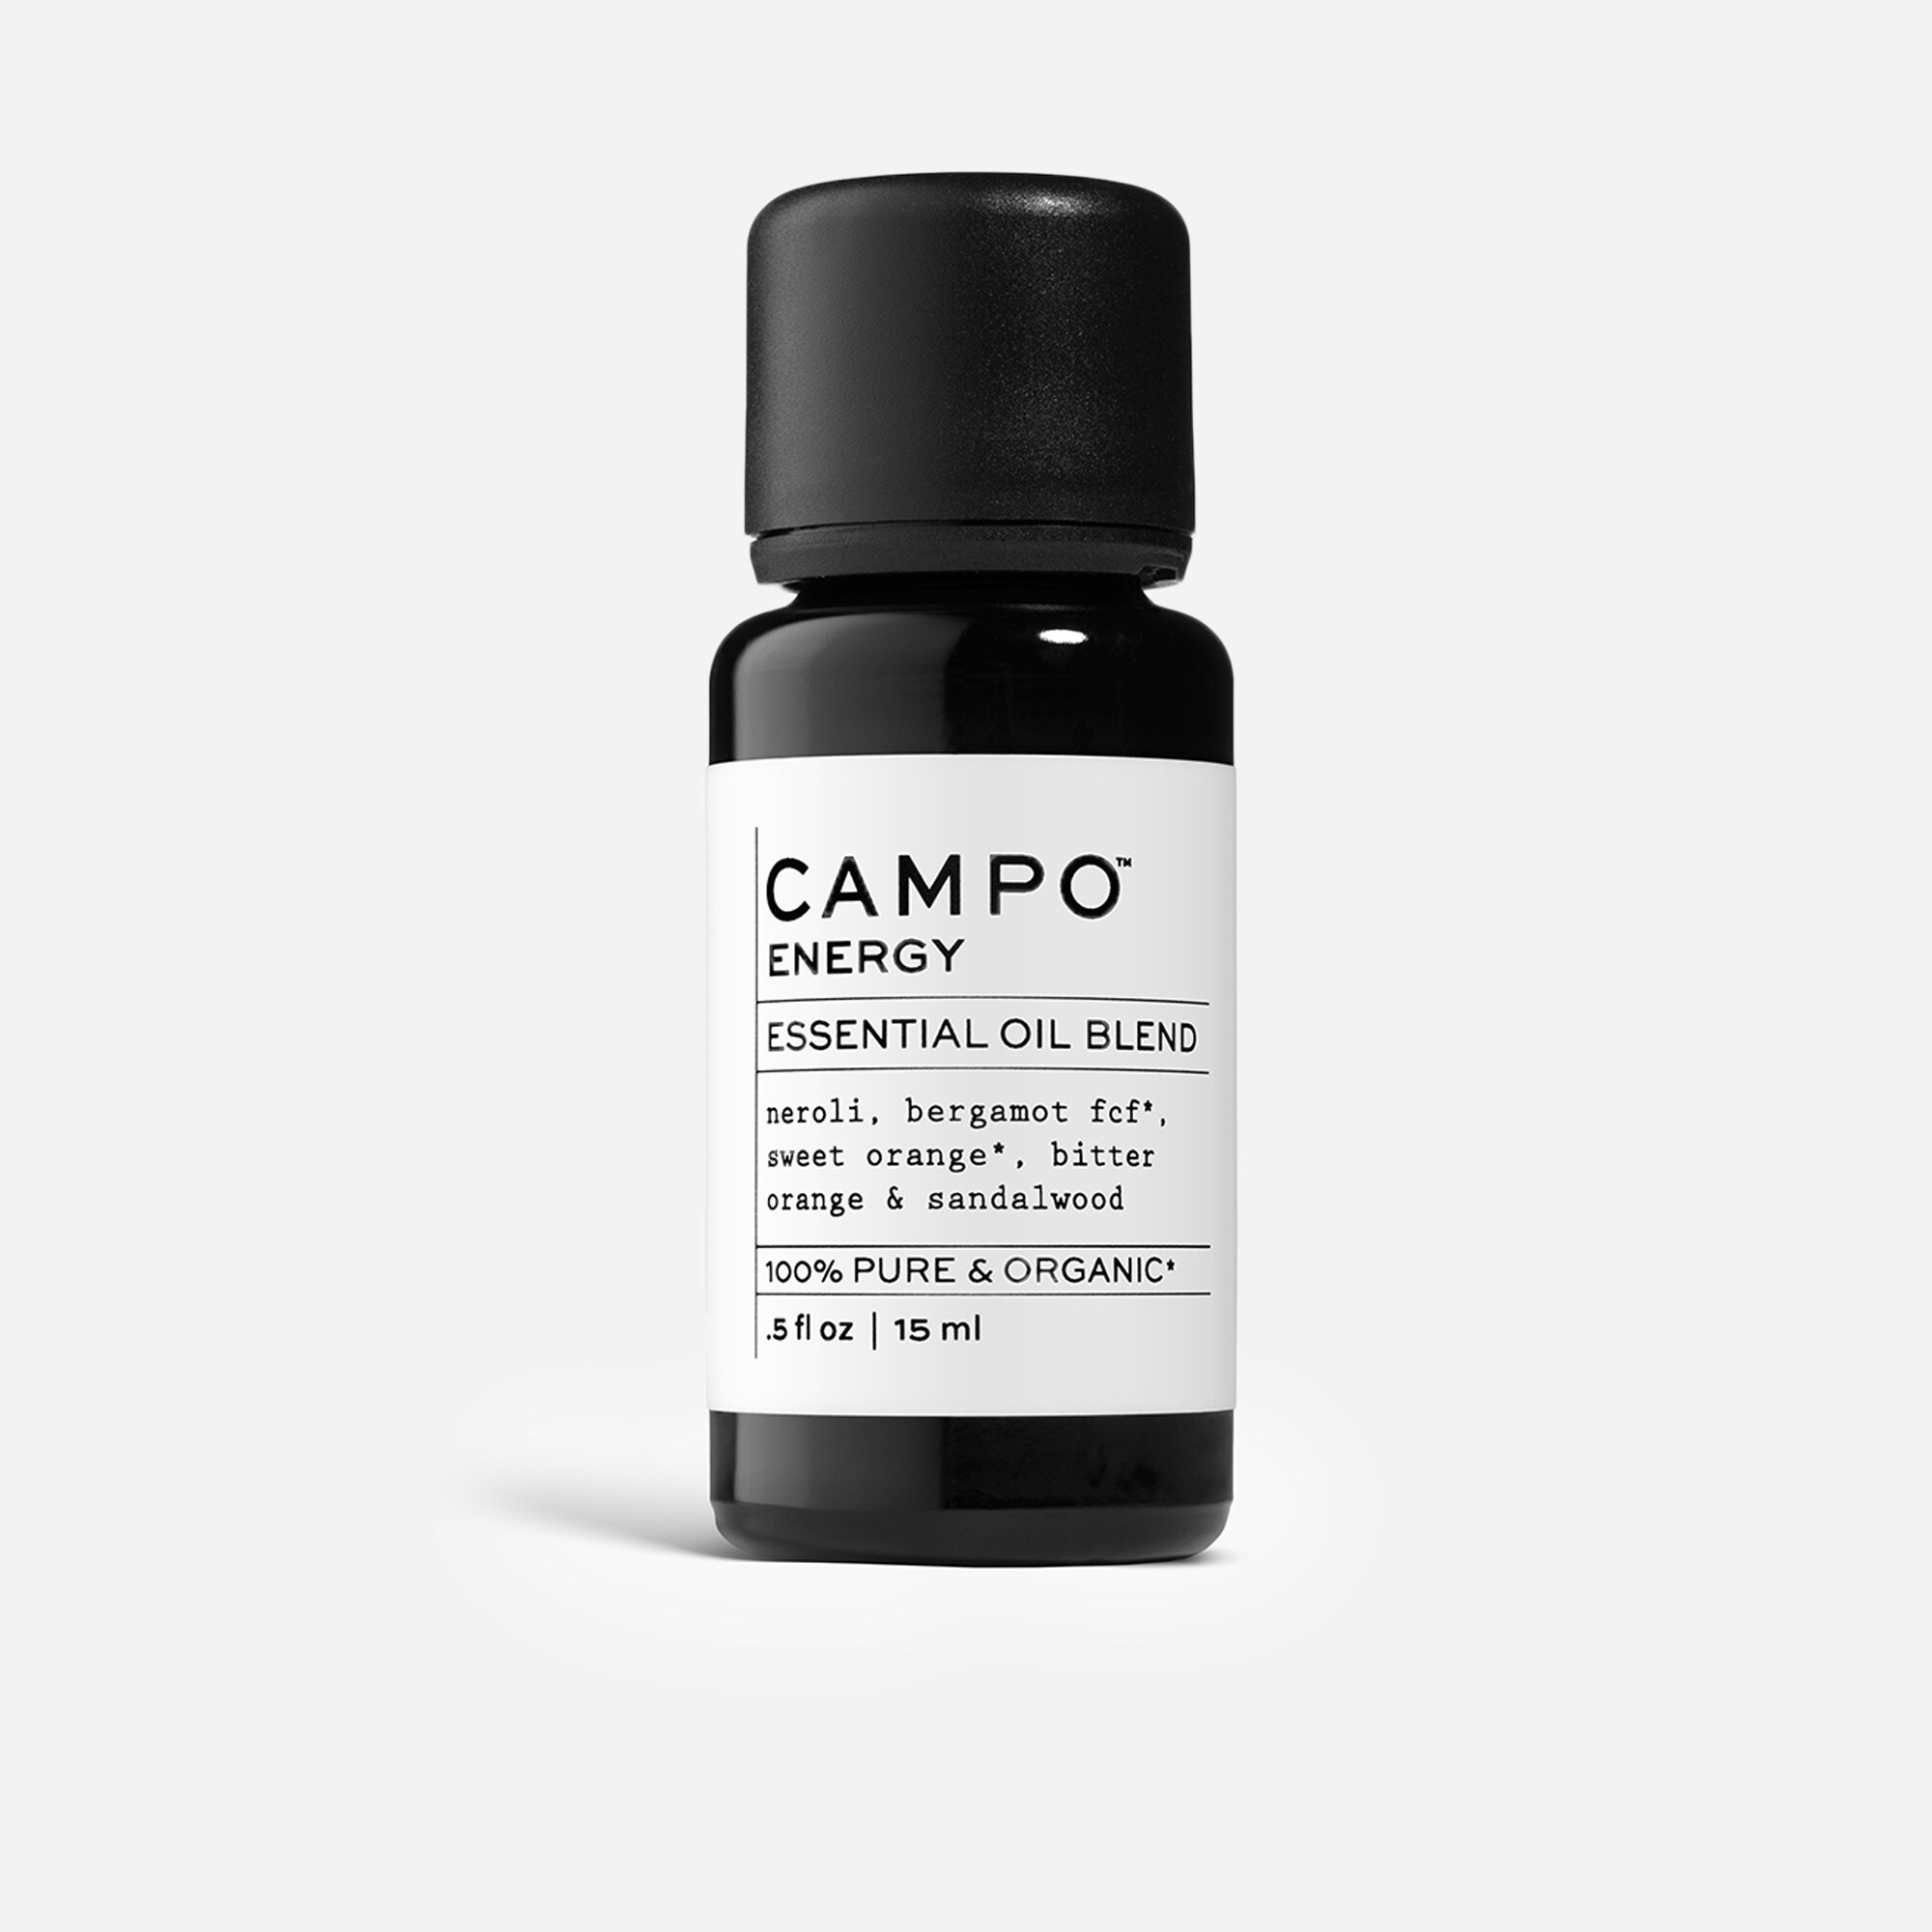  CAMPO® ENERGY pure essential oil blend